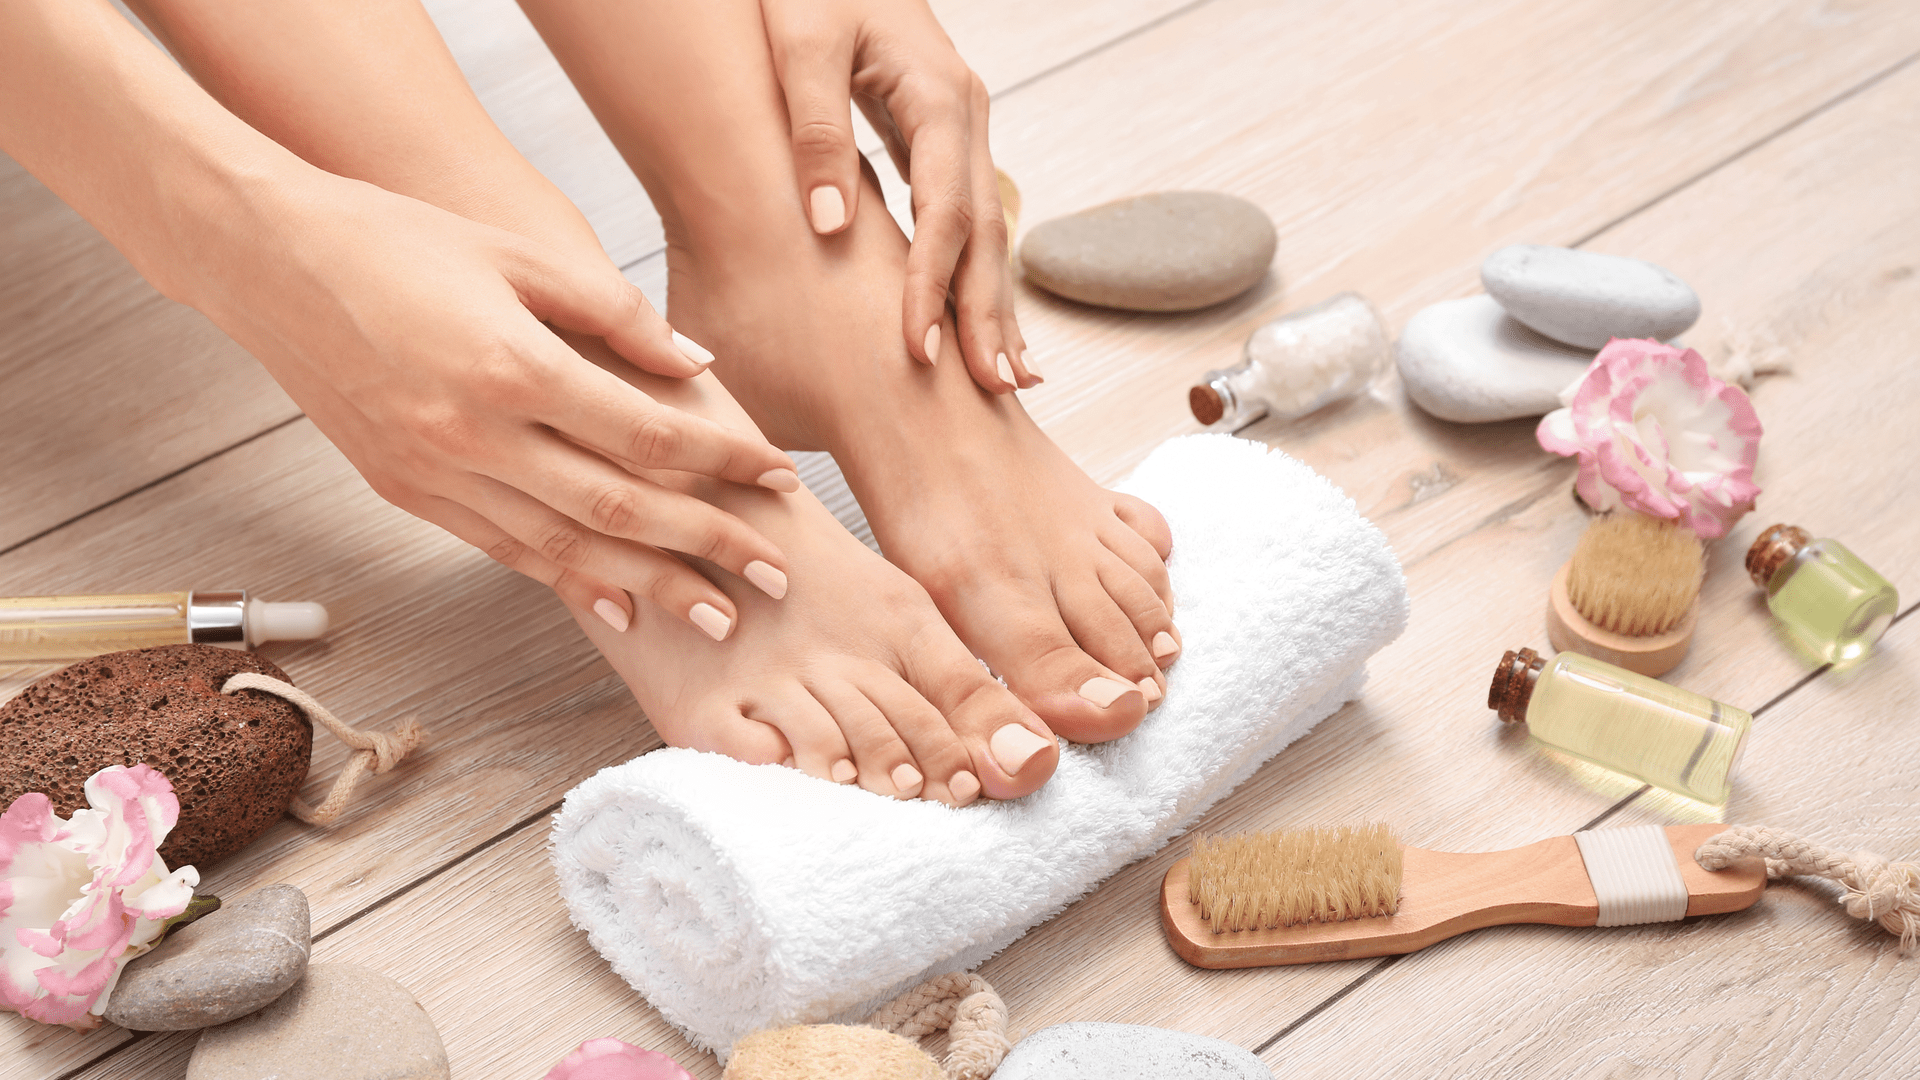 how to take care of my feet naturally